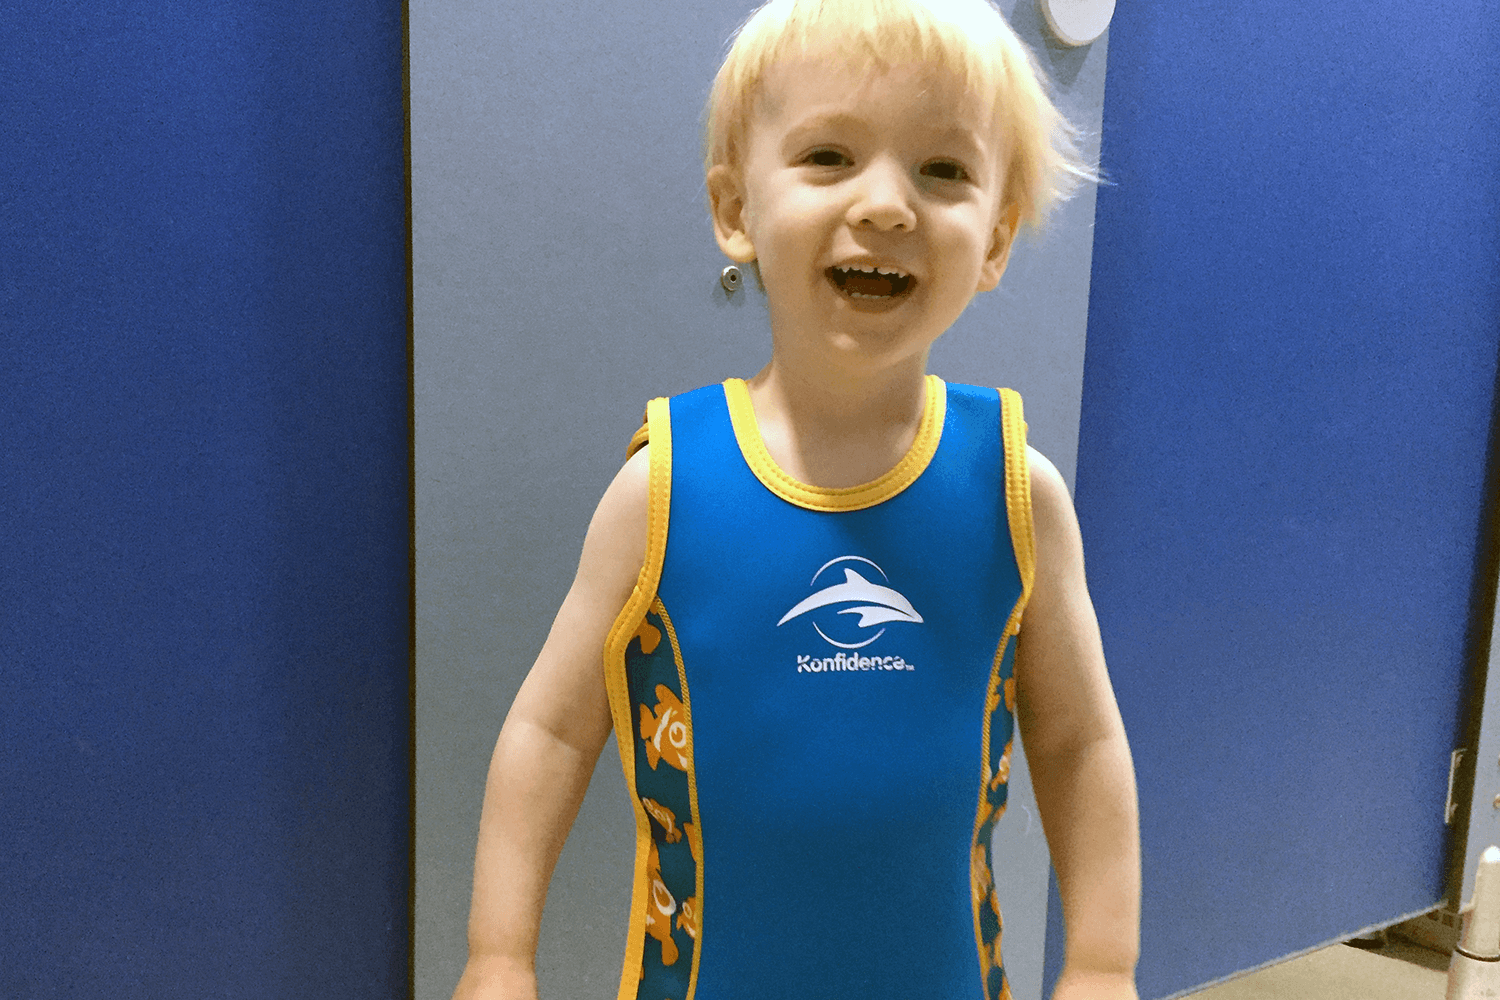 Gabe looking very happy just before his swimming lesson